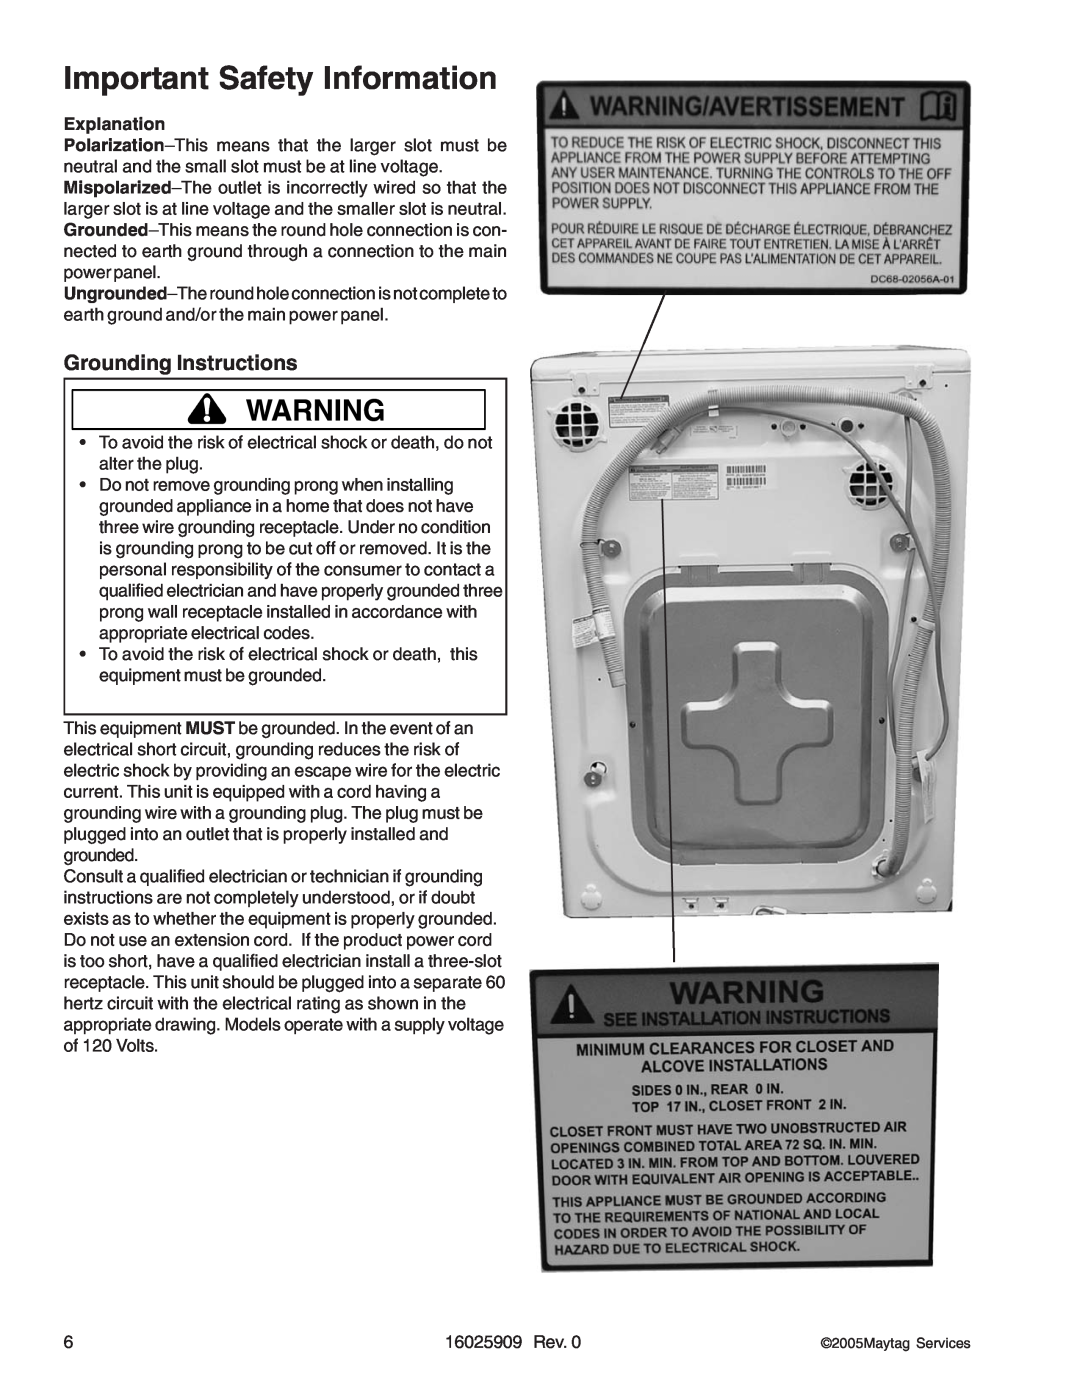 Whirlpool MAH9700AW manual Grounding Instructions, Important Safety Information, Explanation, 16025909 Rev 